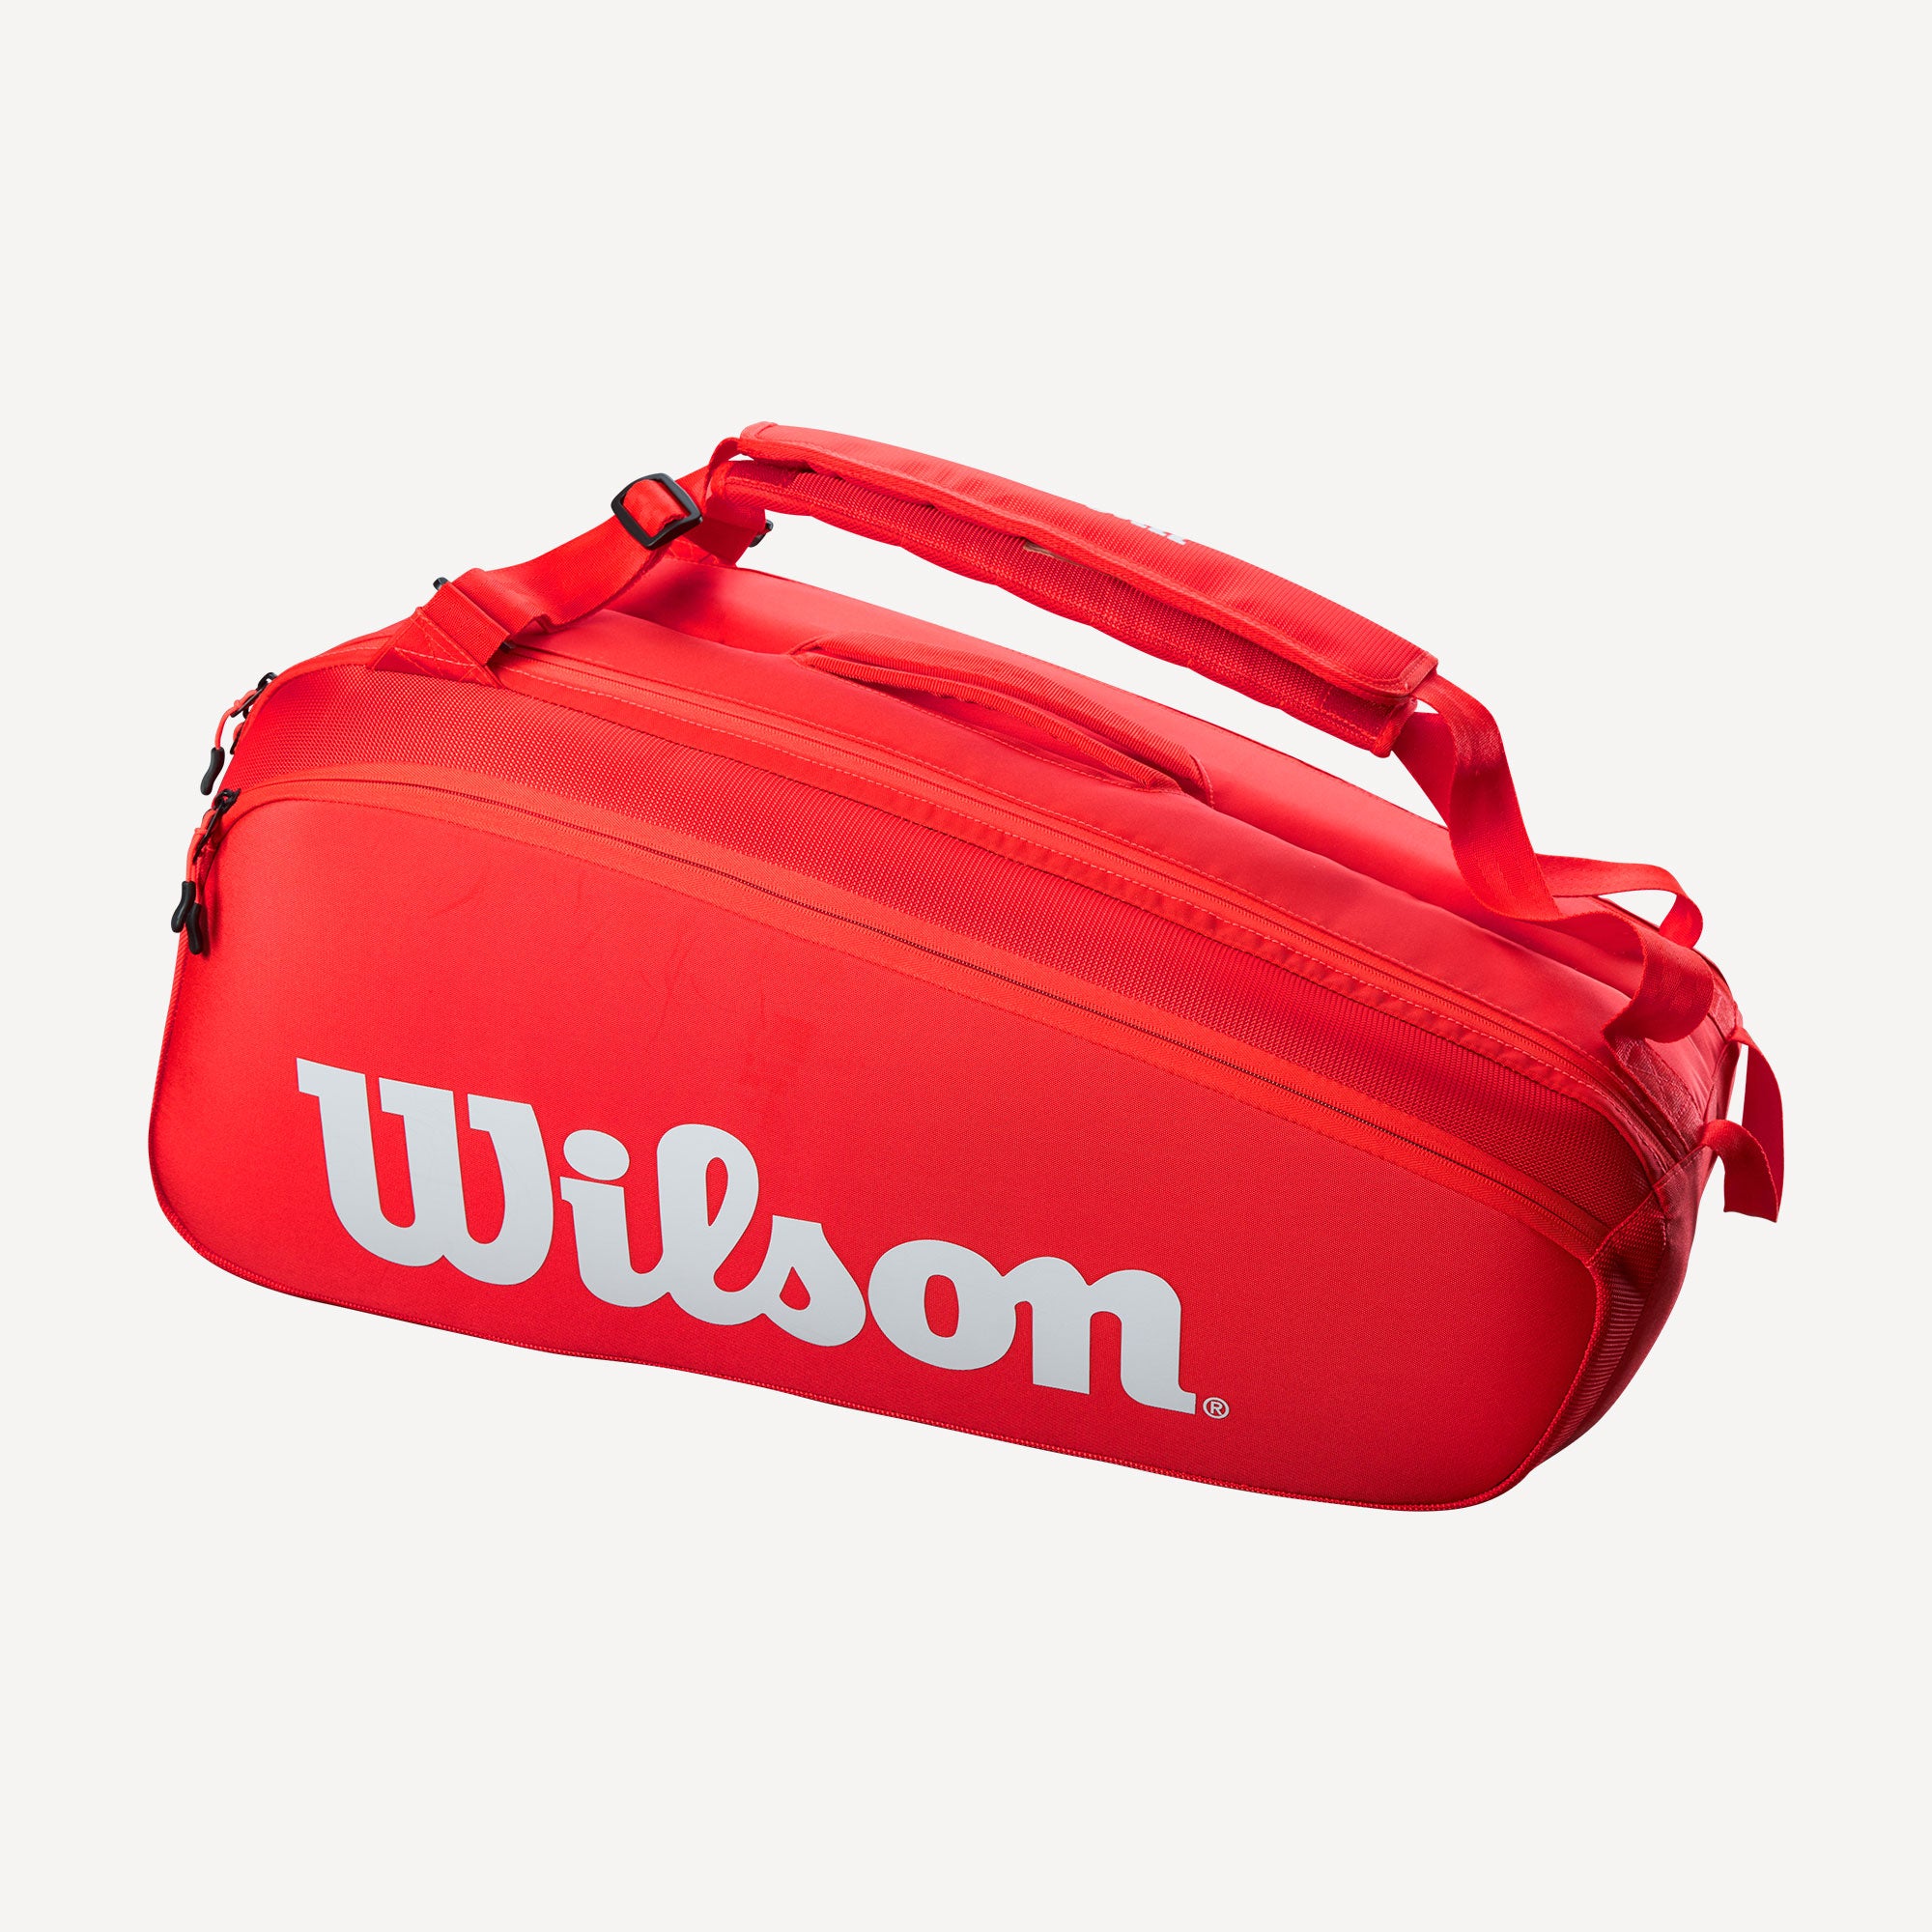 Wilson Super Tour 9 Pack Tennis Back Red (2)